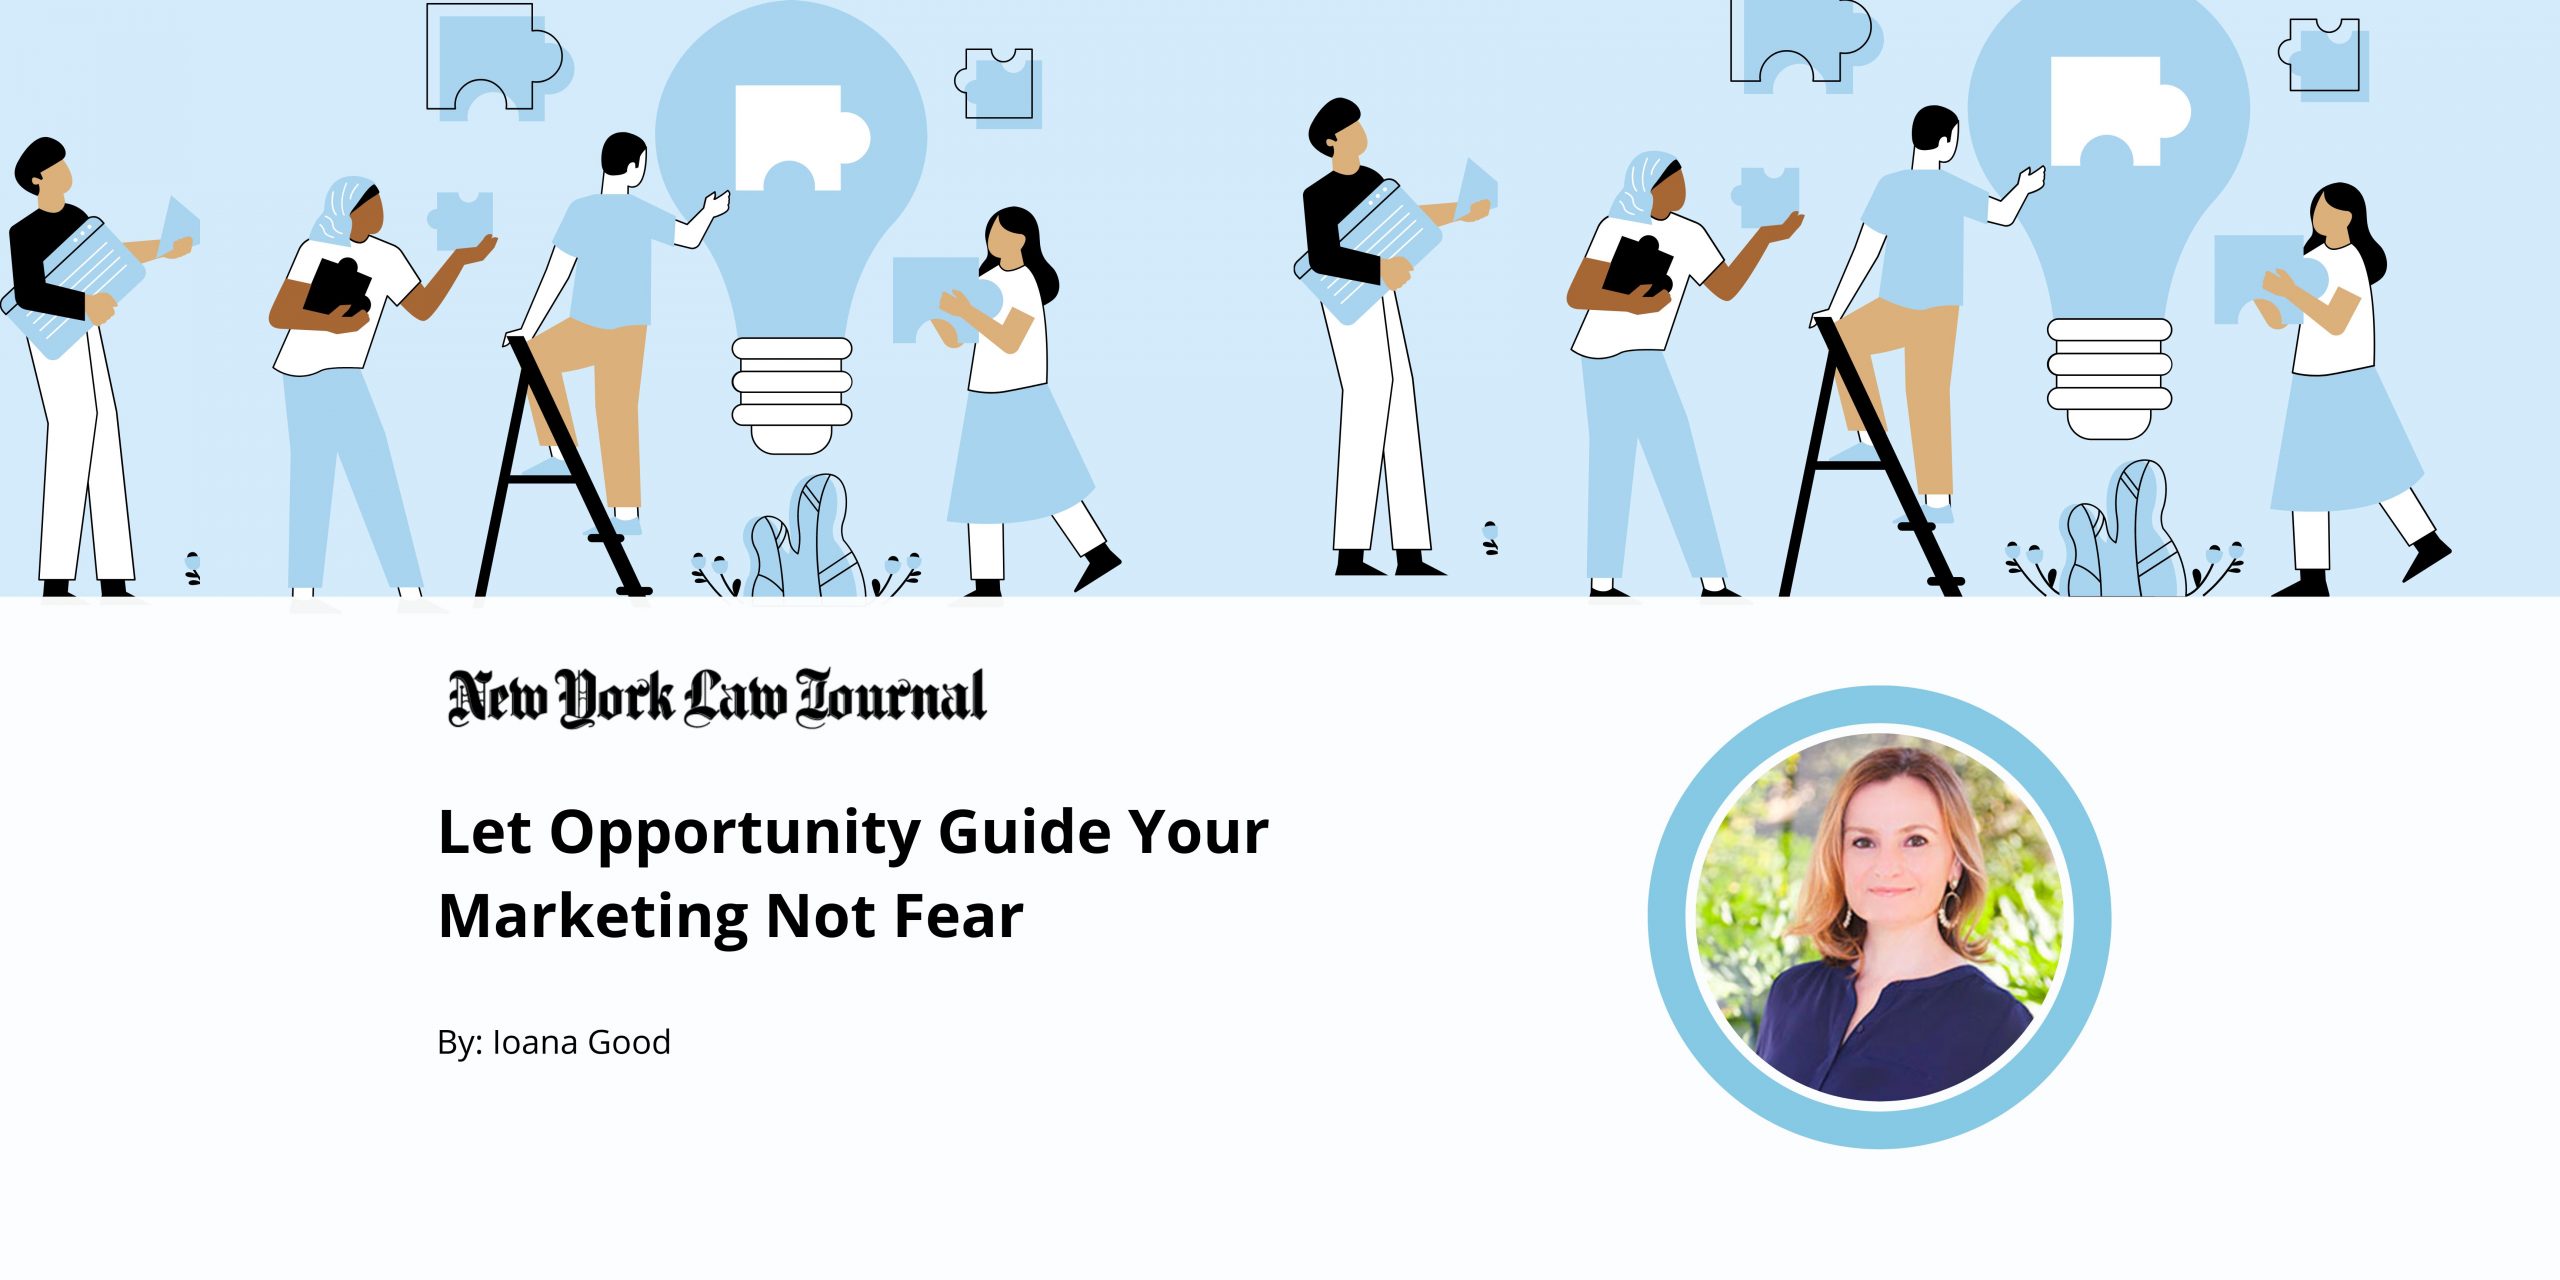 Featured image for “Let Opportunity Guide Your Marketing, Not Fear”